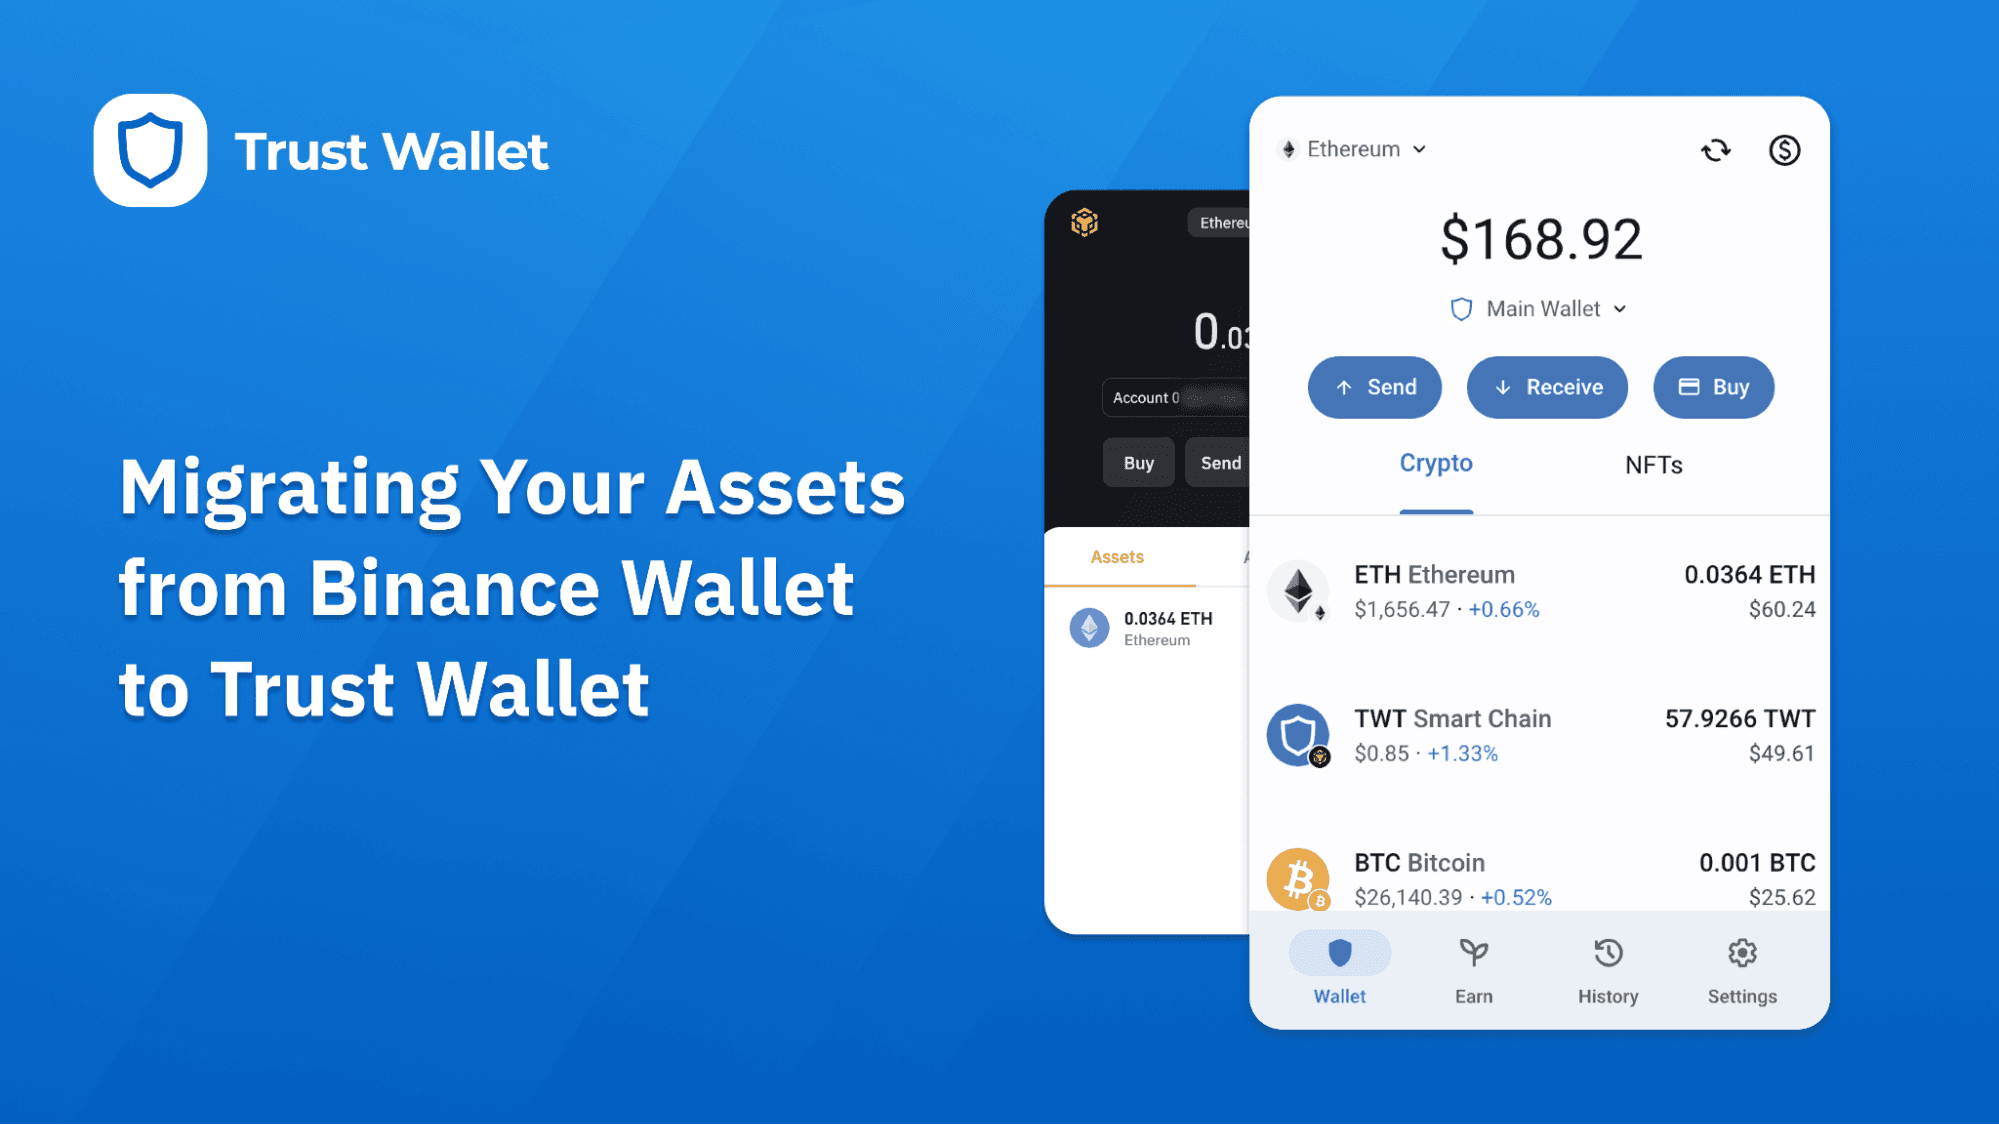 How to Migrate Your Assets from Binance Wallet to Trust Wallet